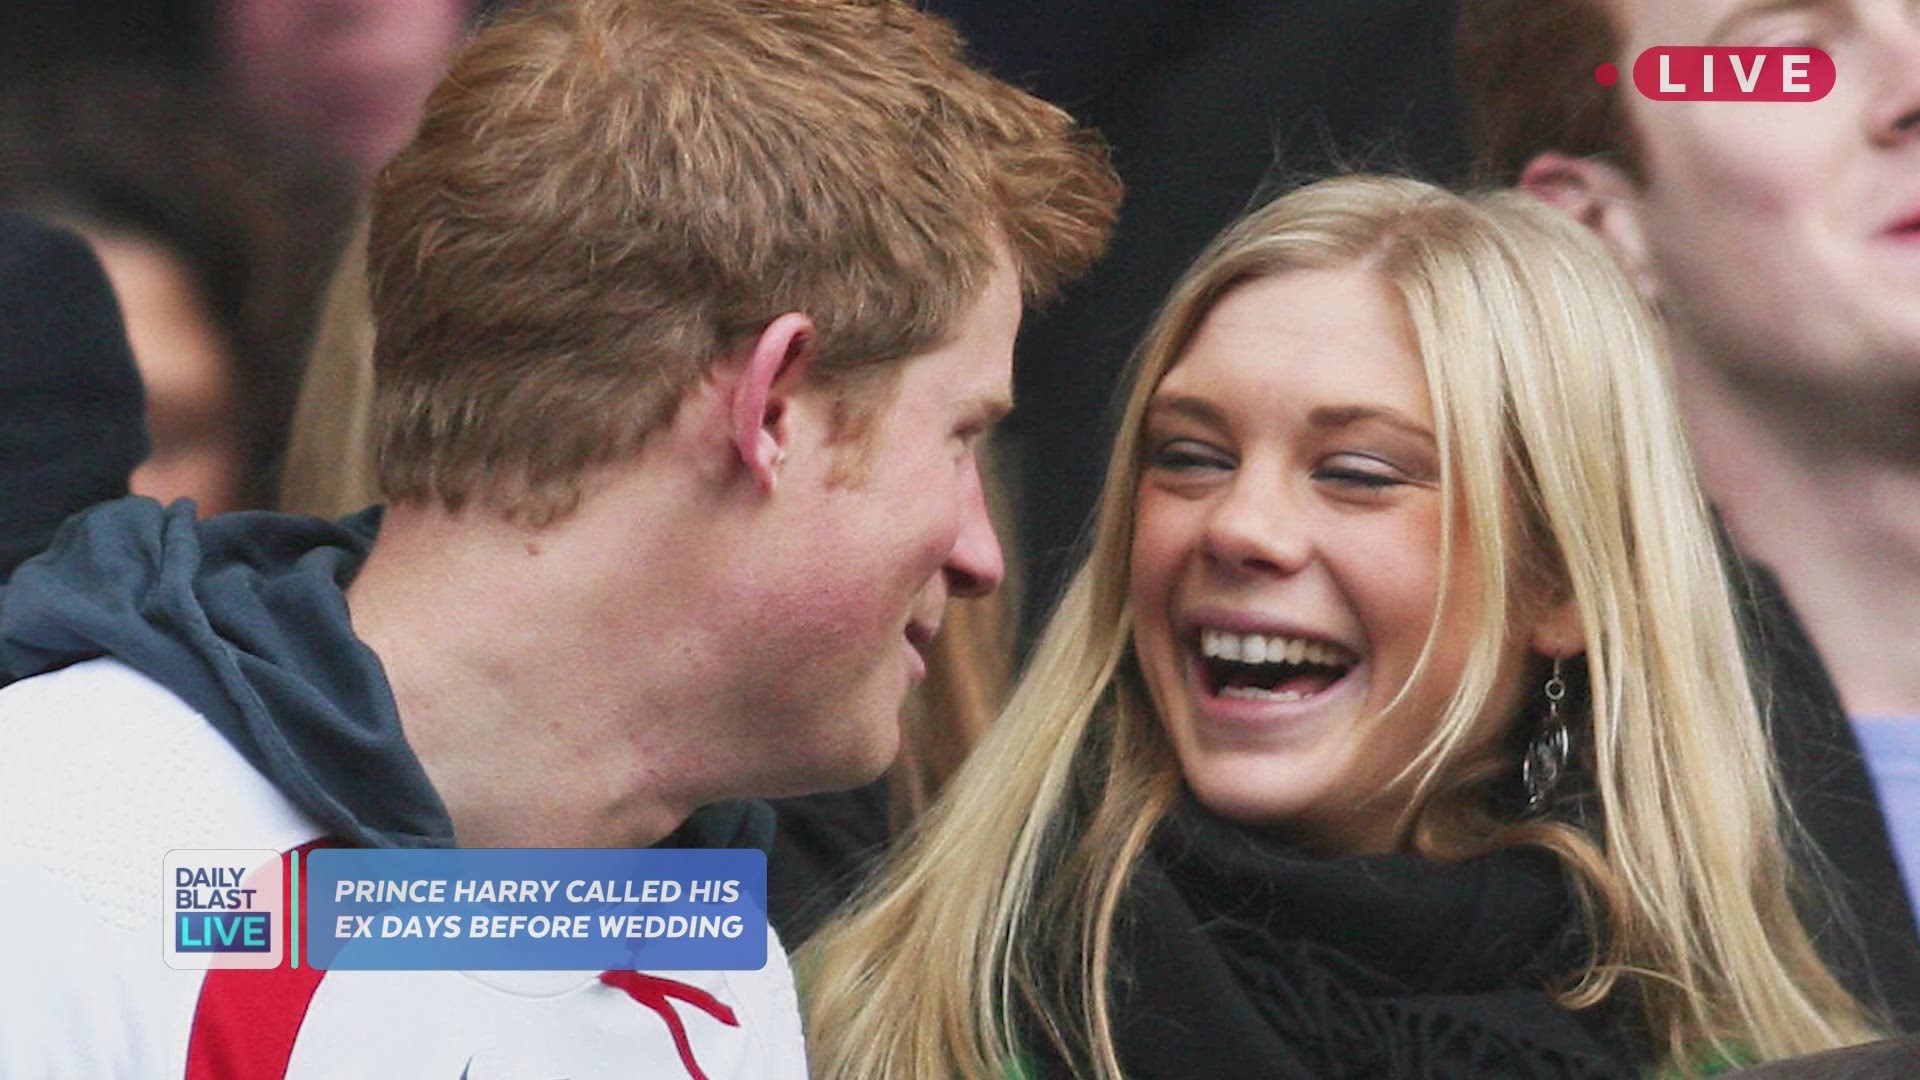 It's been almost a week since the royal wedding, but there's one detail people can't seem to get over. Prince Harry reportedly called his ex-girlfriend, Chelsy Daly, ahead of the big day to check in with her and acknowledge that they were both moving on.